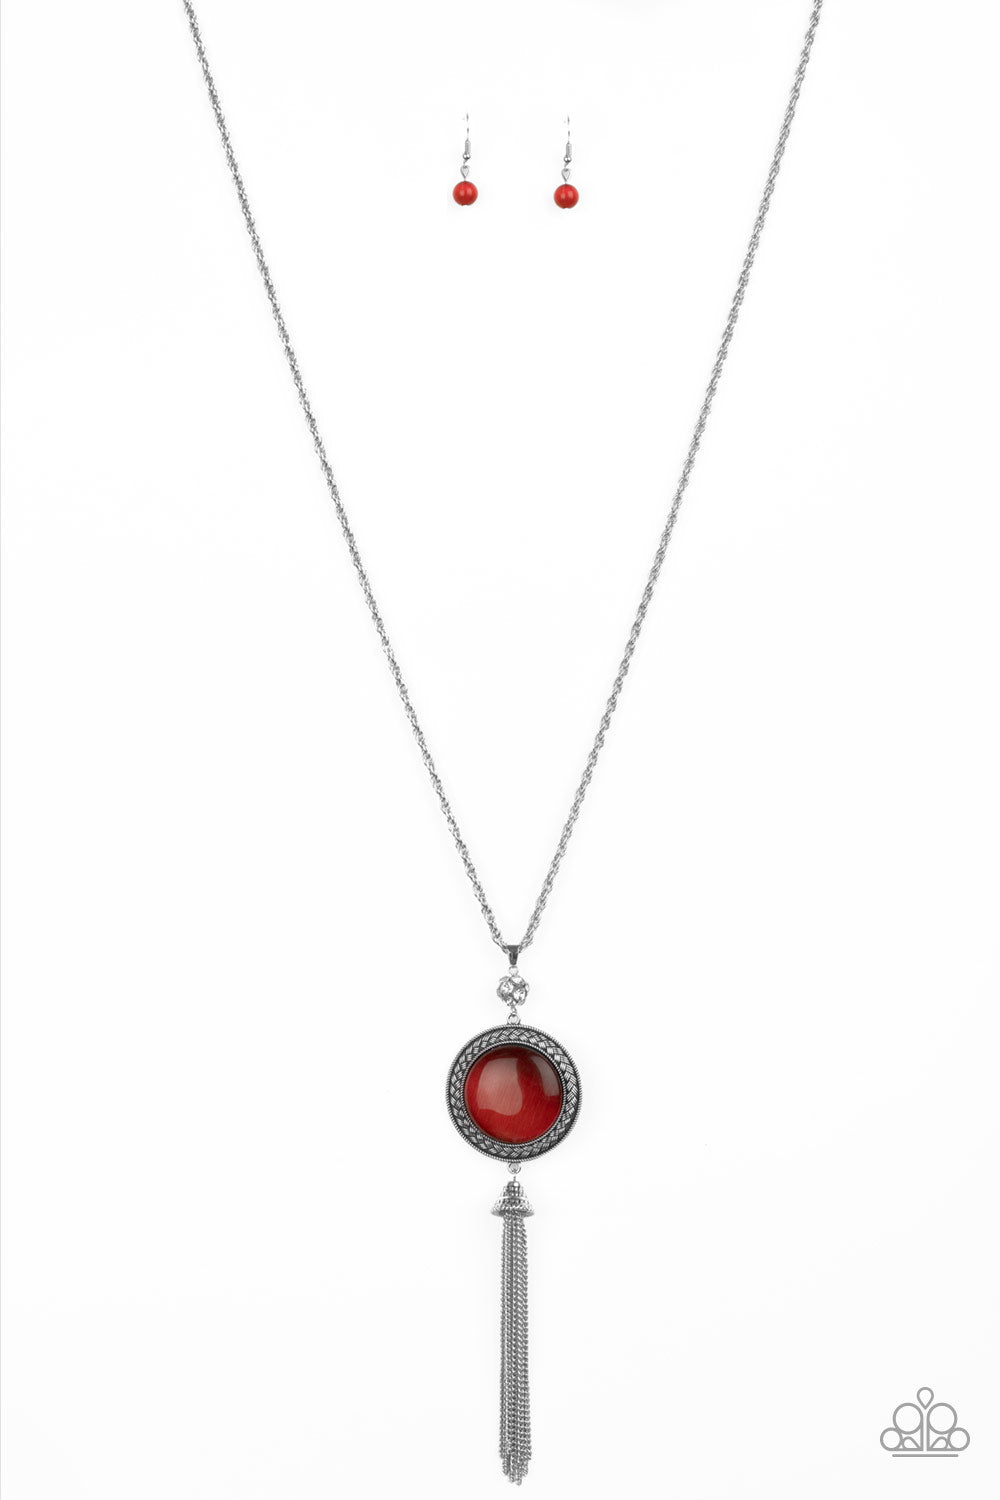 Serene Serendipity - Red moonstone necklace